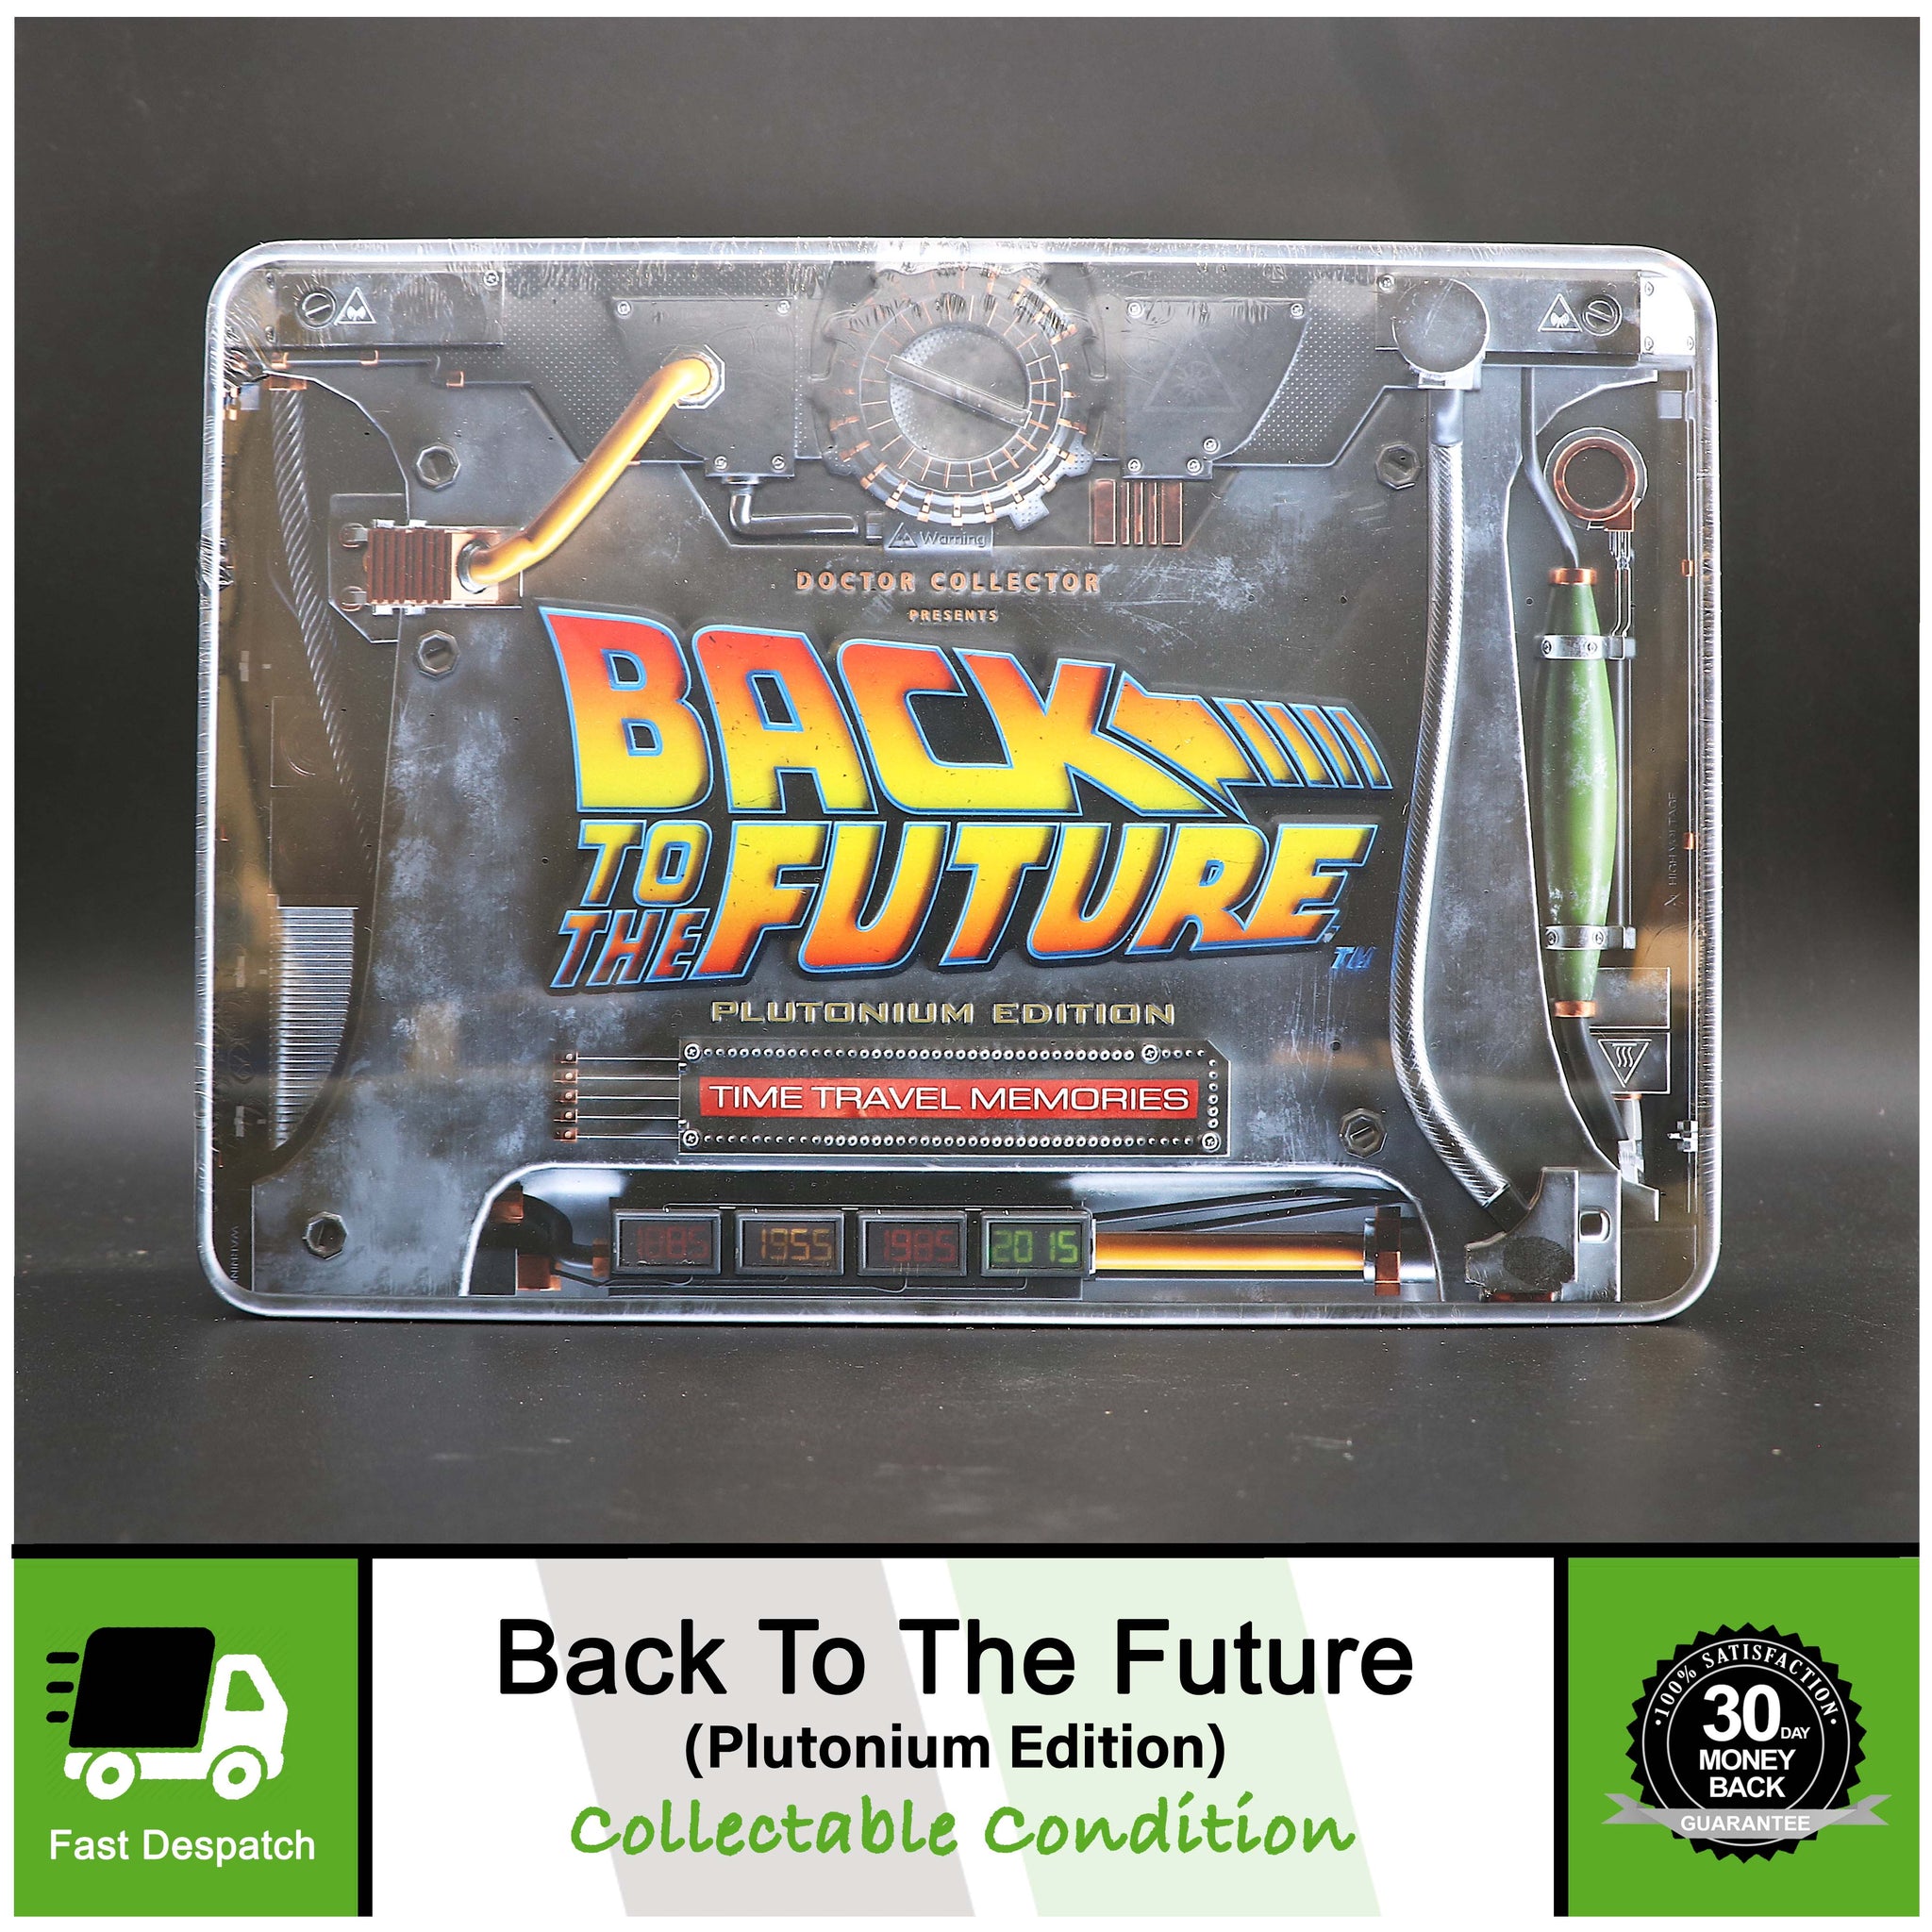 Back To The Future Plutonium Edition - Time Travel Memories - Doctor Collector